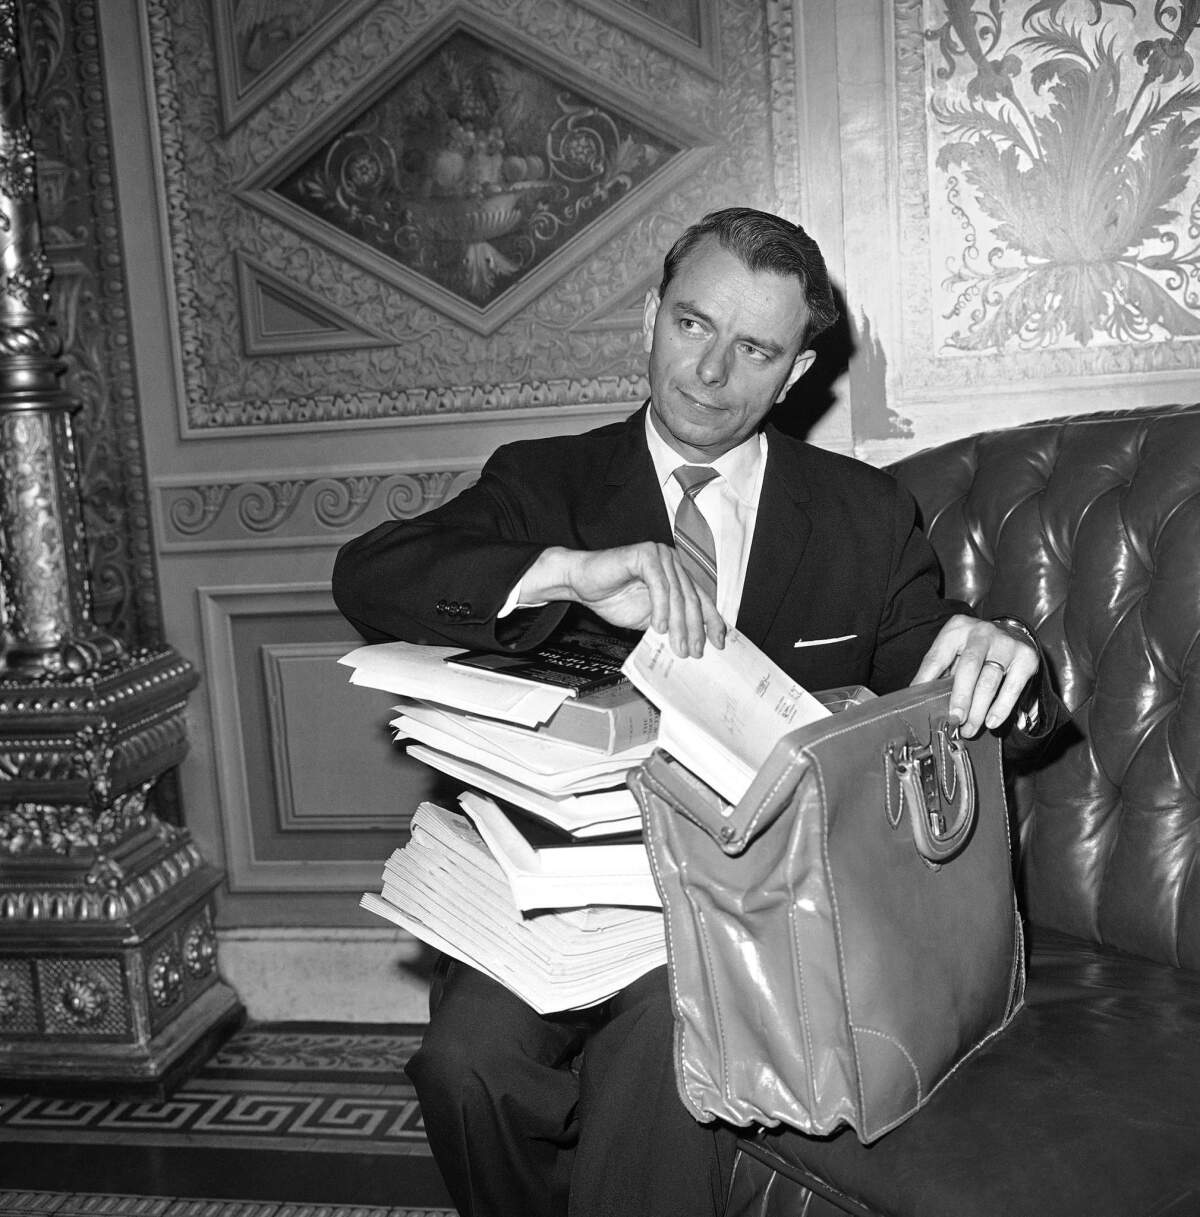 In this 1964 photo, Sen. Robert C. Byrd (D-W.Va.) repacks his briefcase after a more than 15-hour filibuster against a civil rights bill.